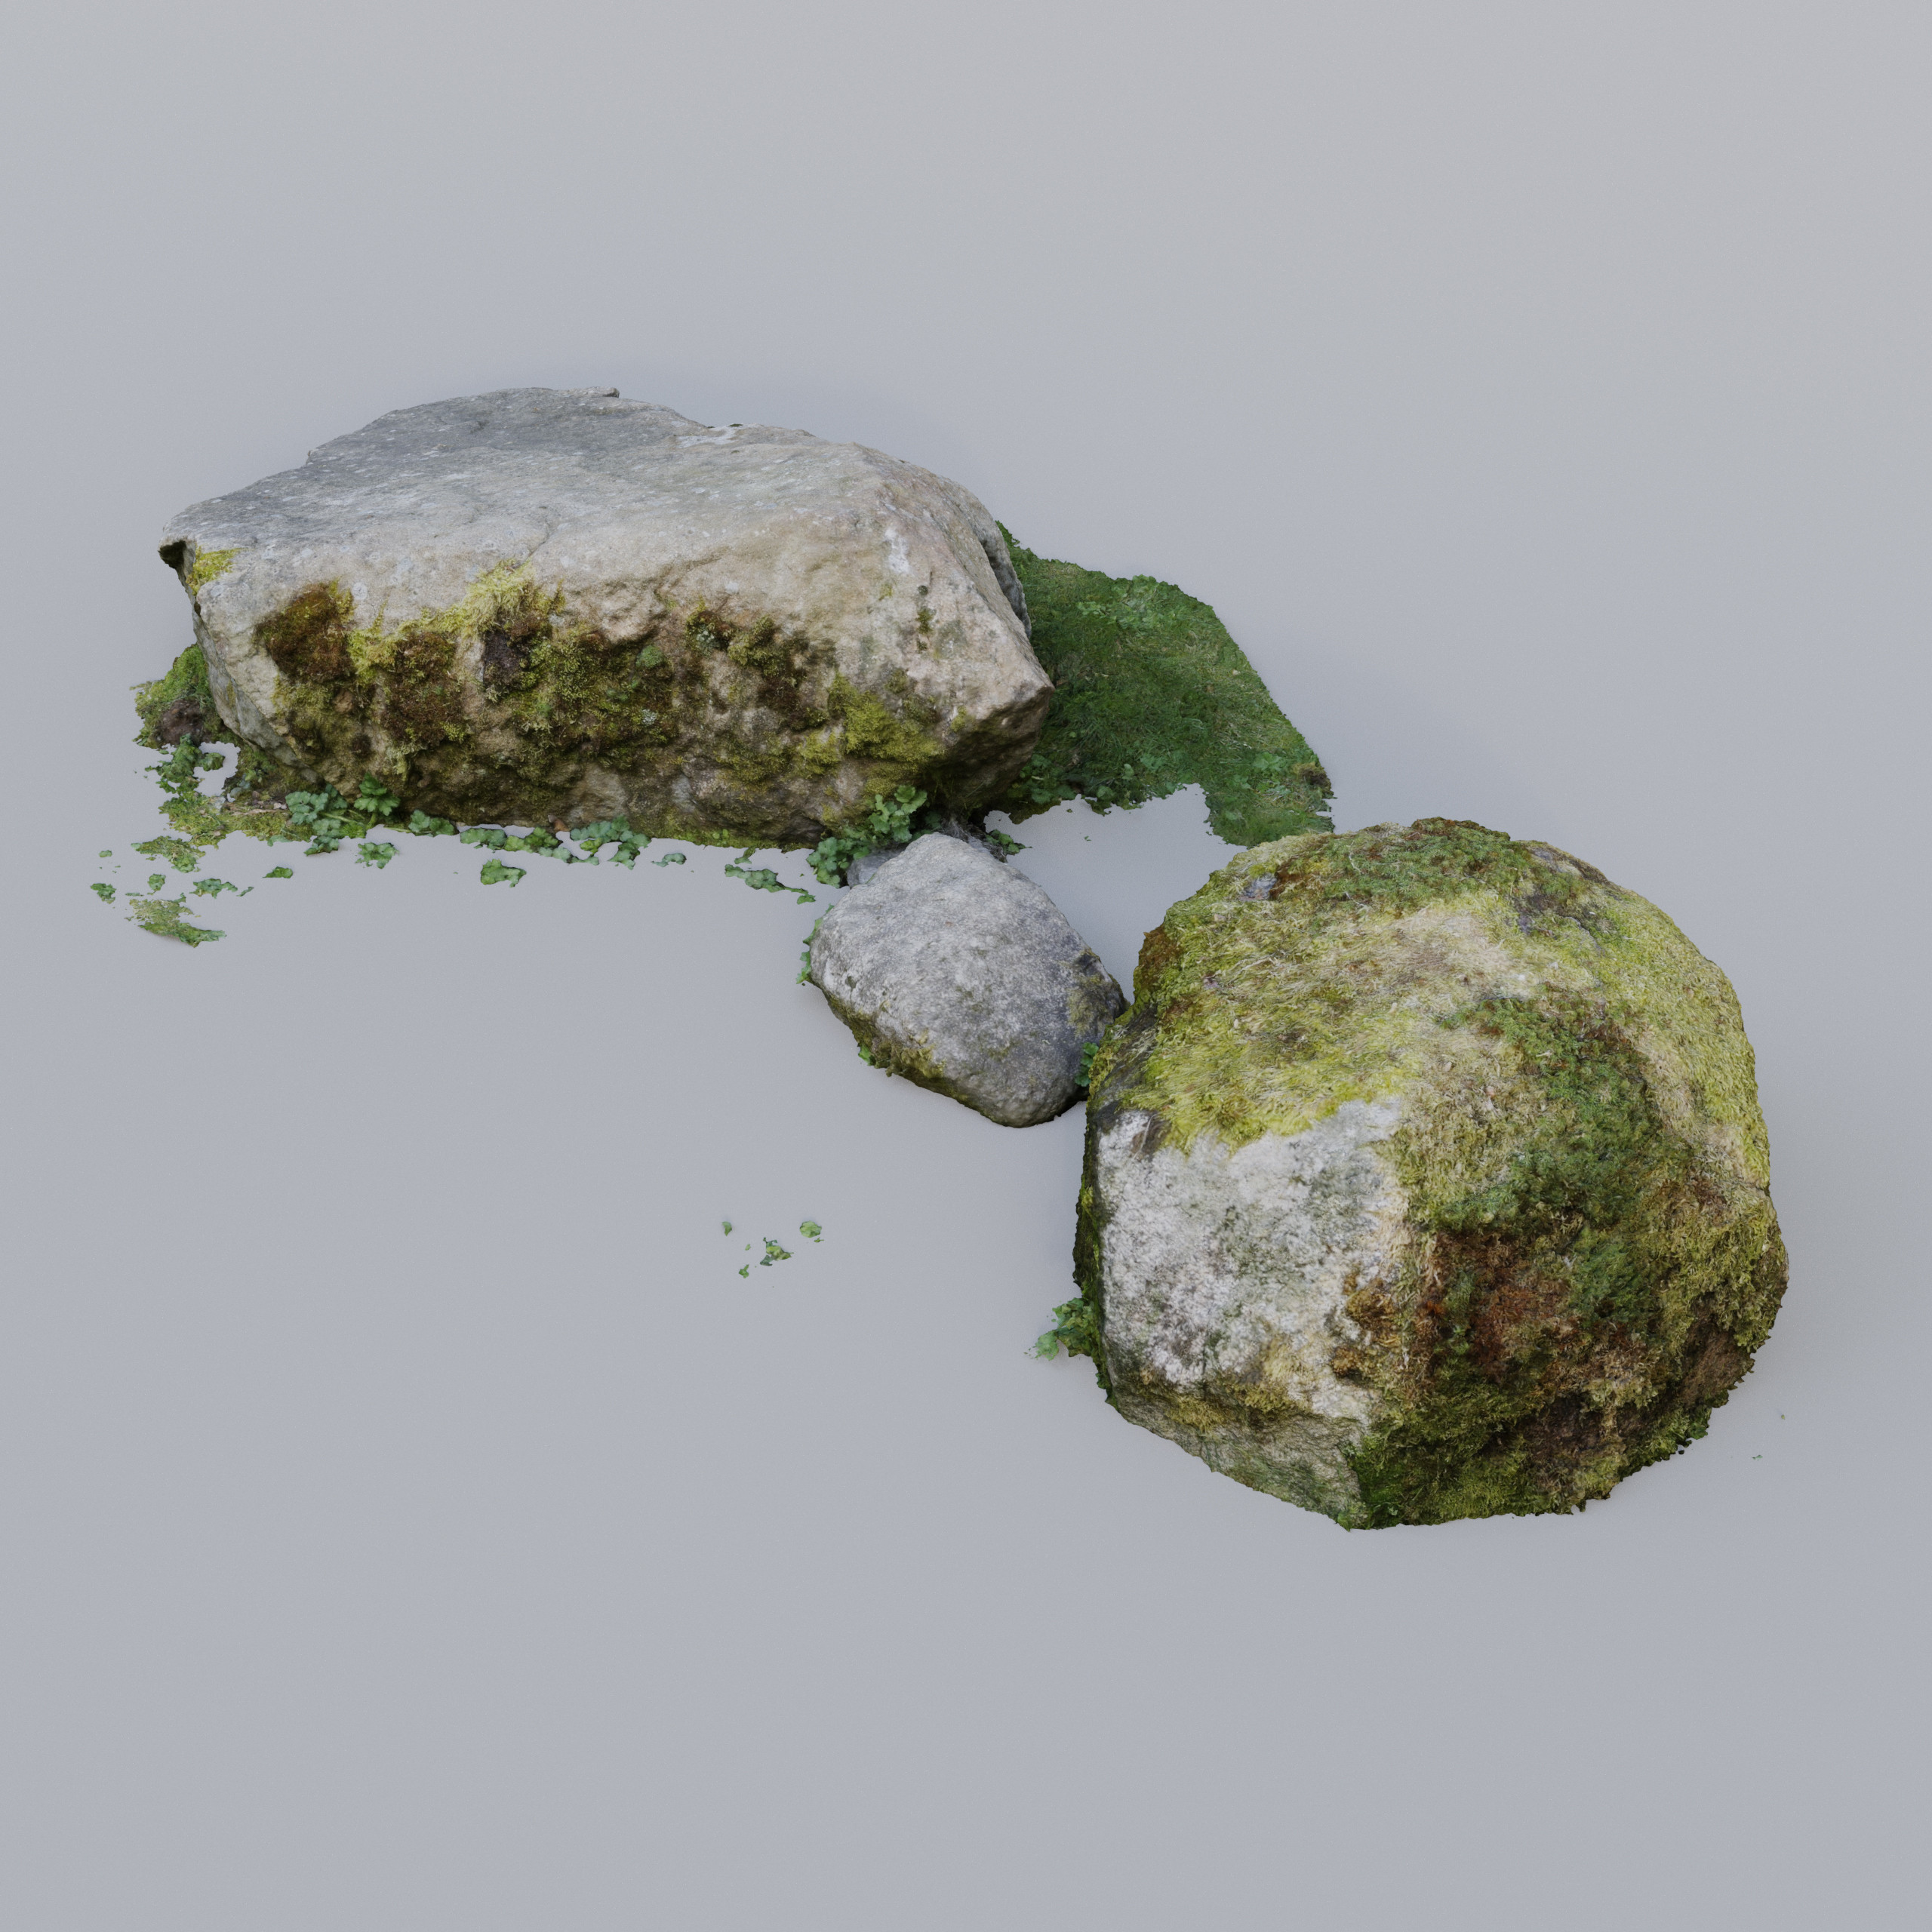 Rock cluster photogrammetry study. Retopologized and rendered in Blender 2.8